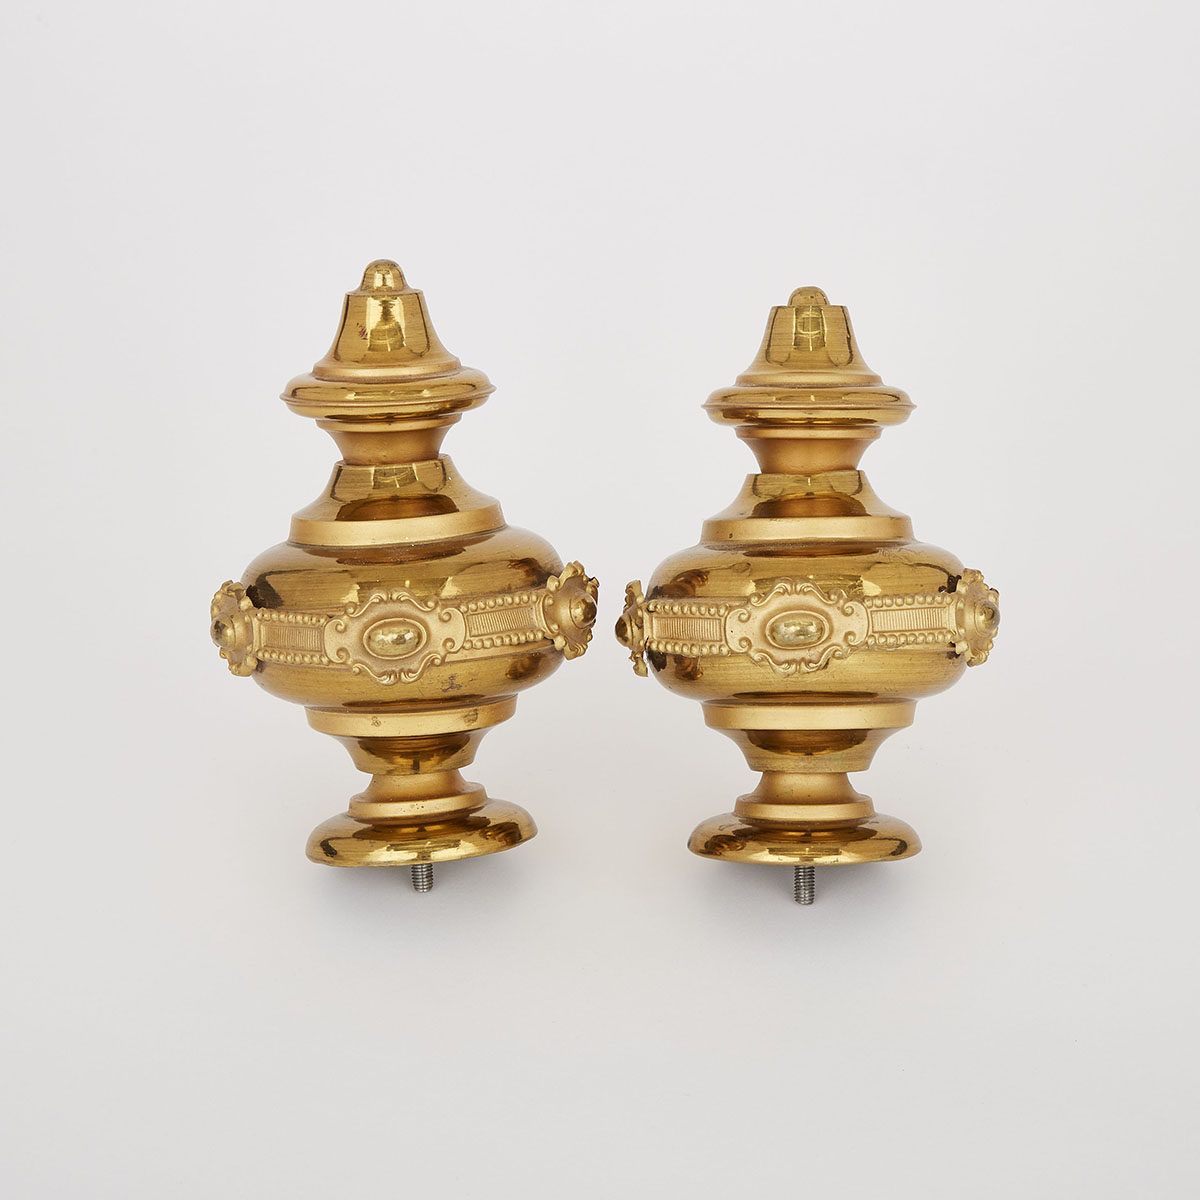 Large Pair of Victorian Lacquered and Gilt Brass Curtain Finials, c.1870